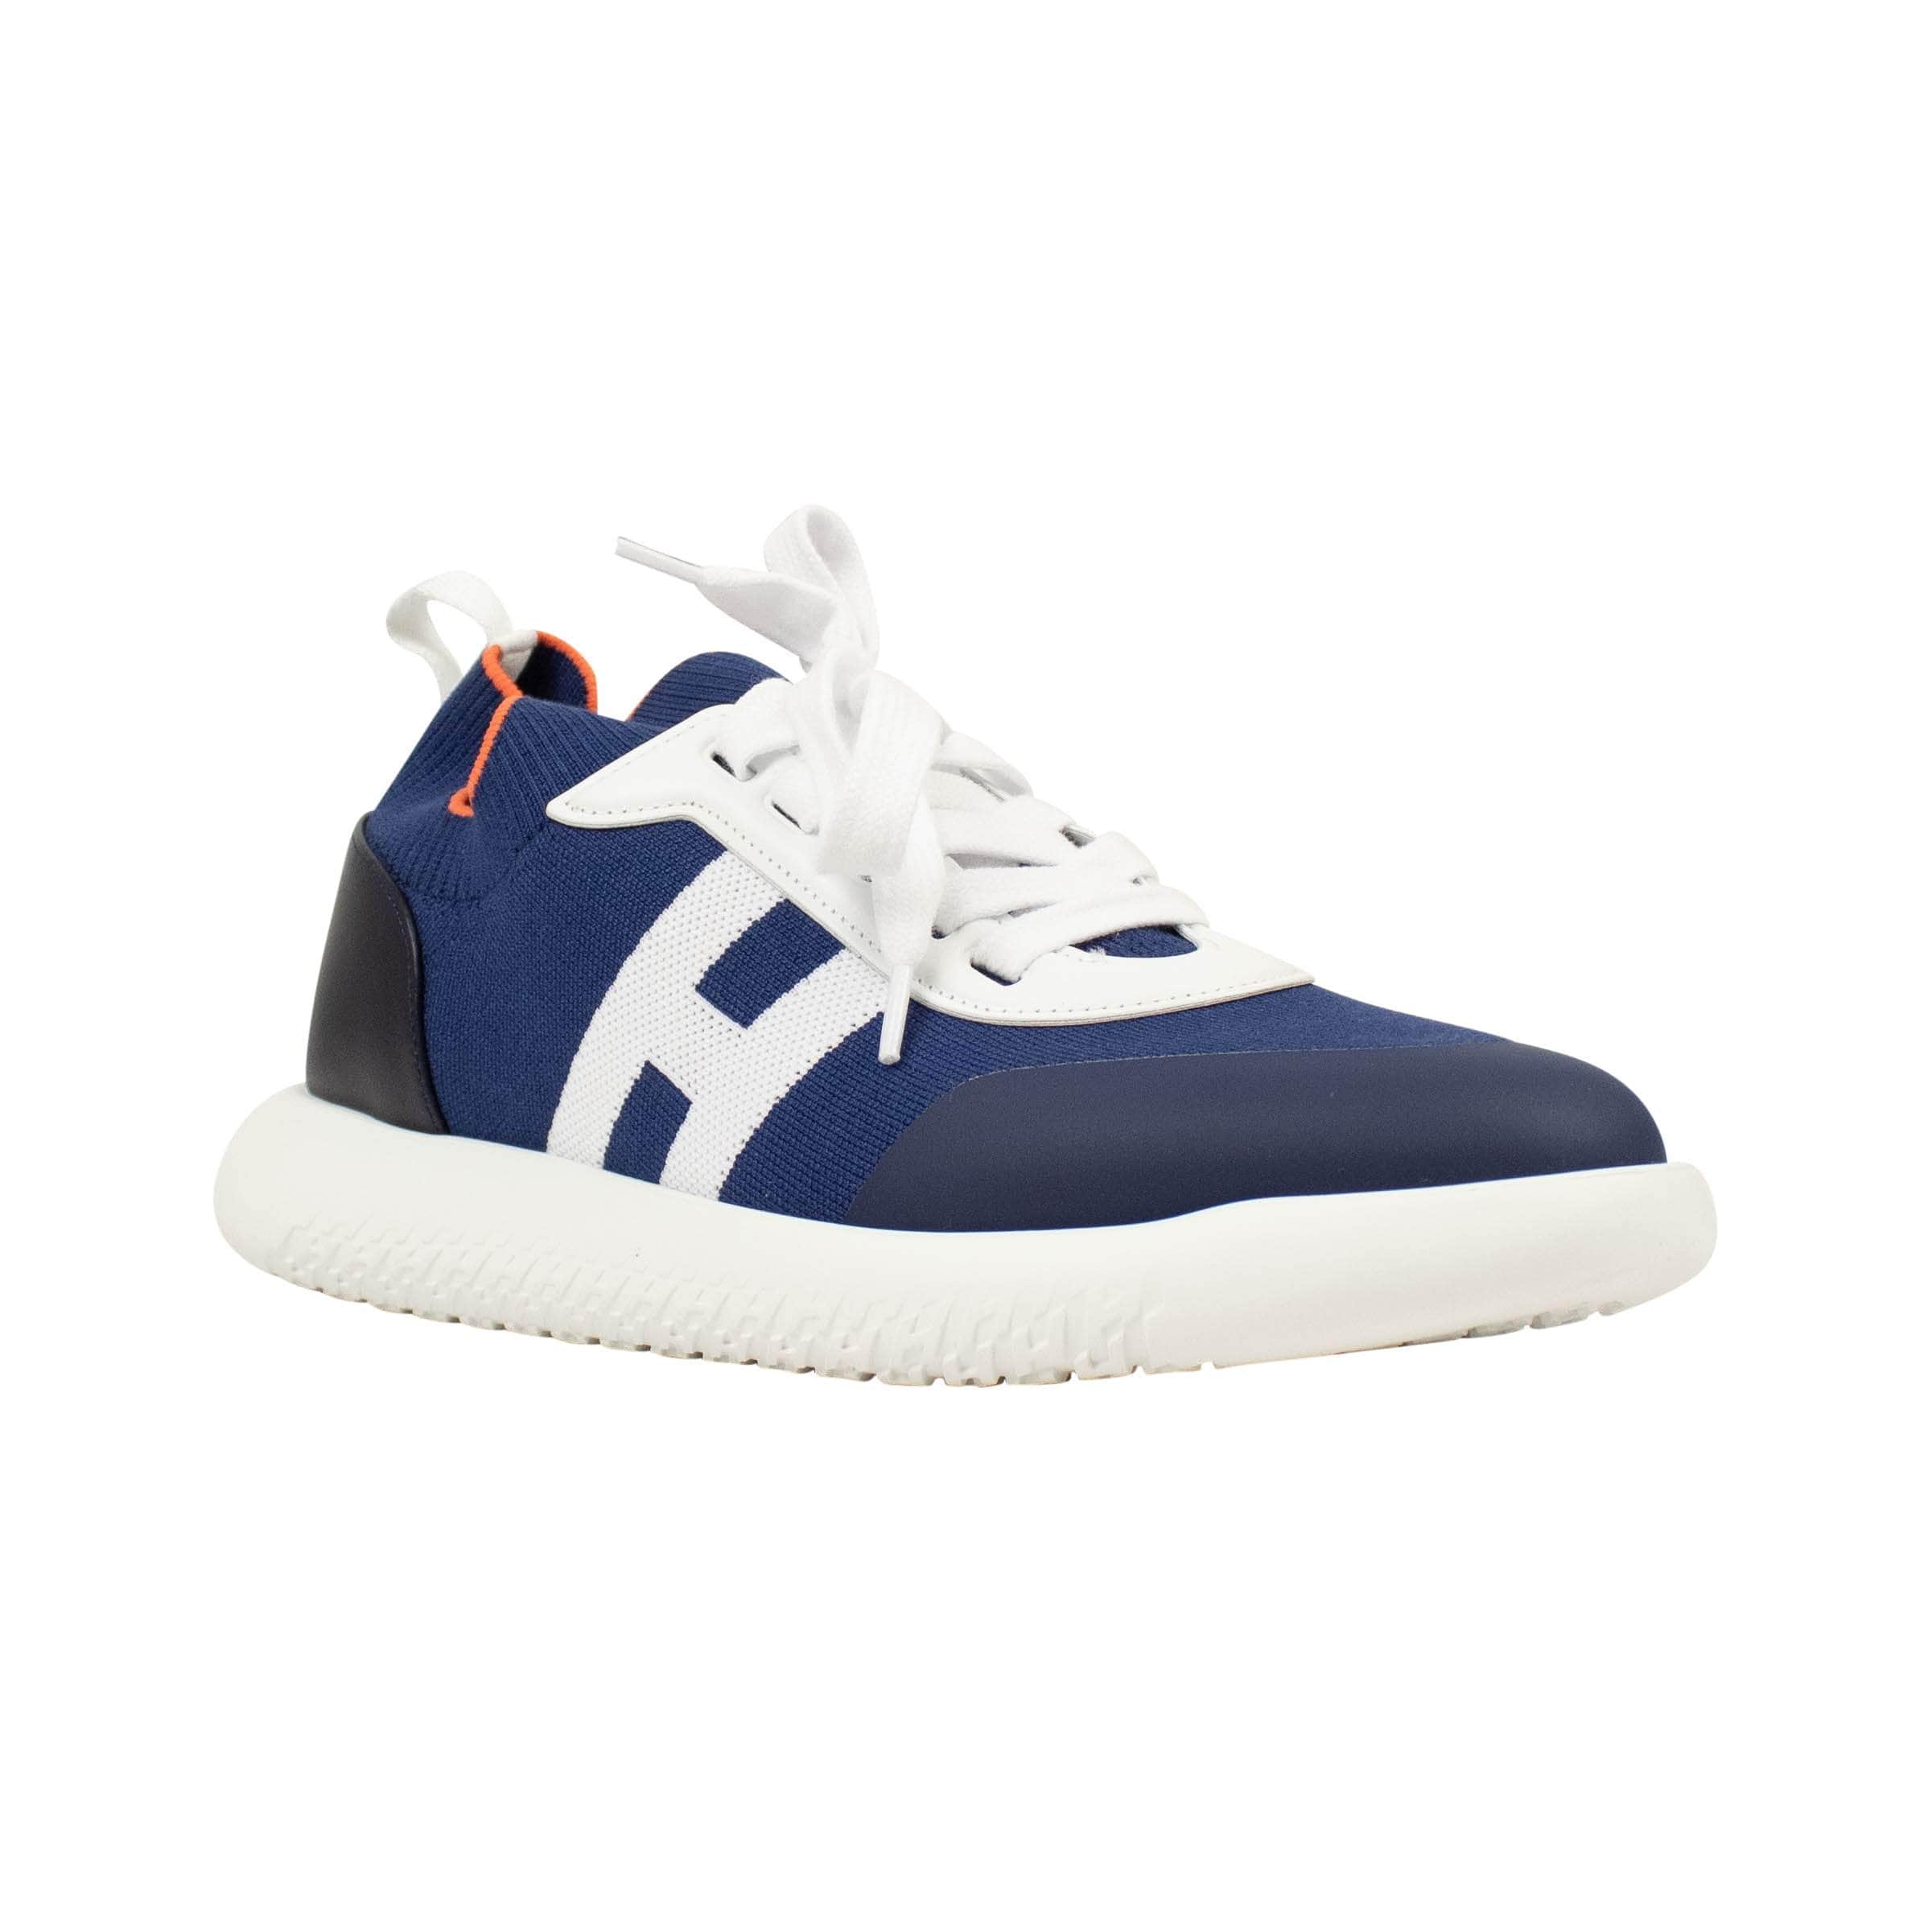 HERMES 1000-2000, channelenable-all, chicmi, couponcollection, gender-mens, main-shoes, mens-shoes, SPO 41 Crew Sneakers Bleu Indigo 92S-2022/41 92S-2022/41